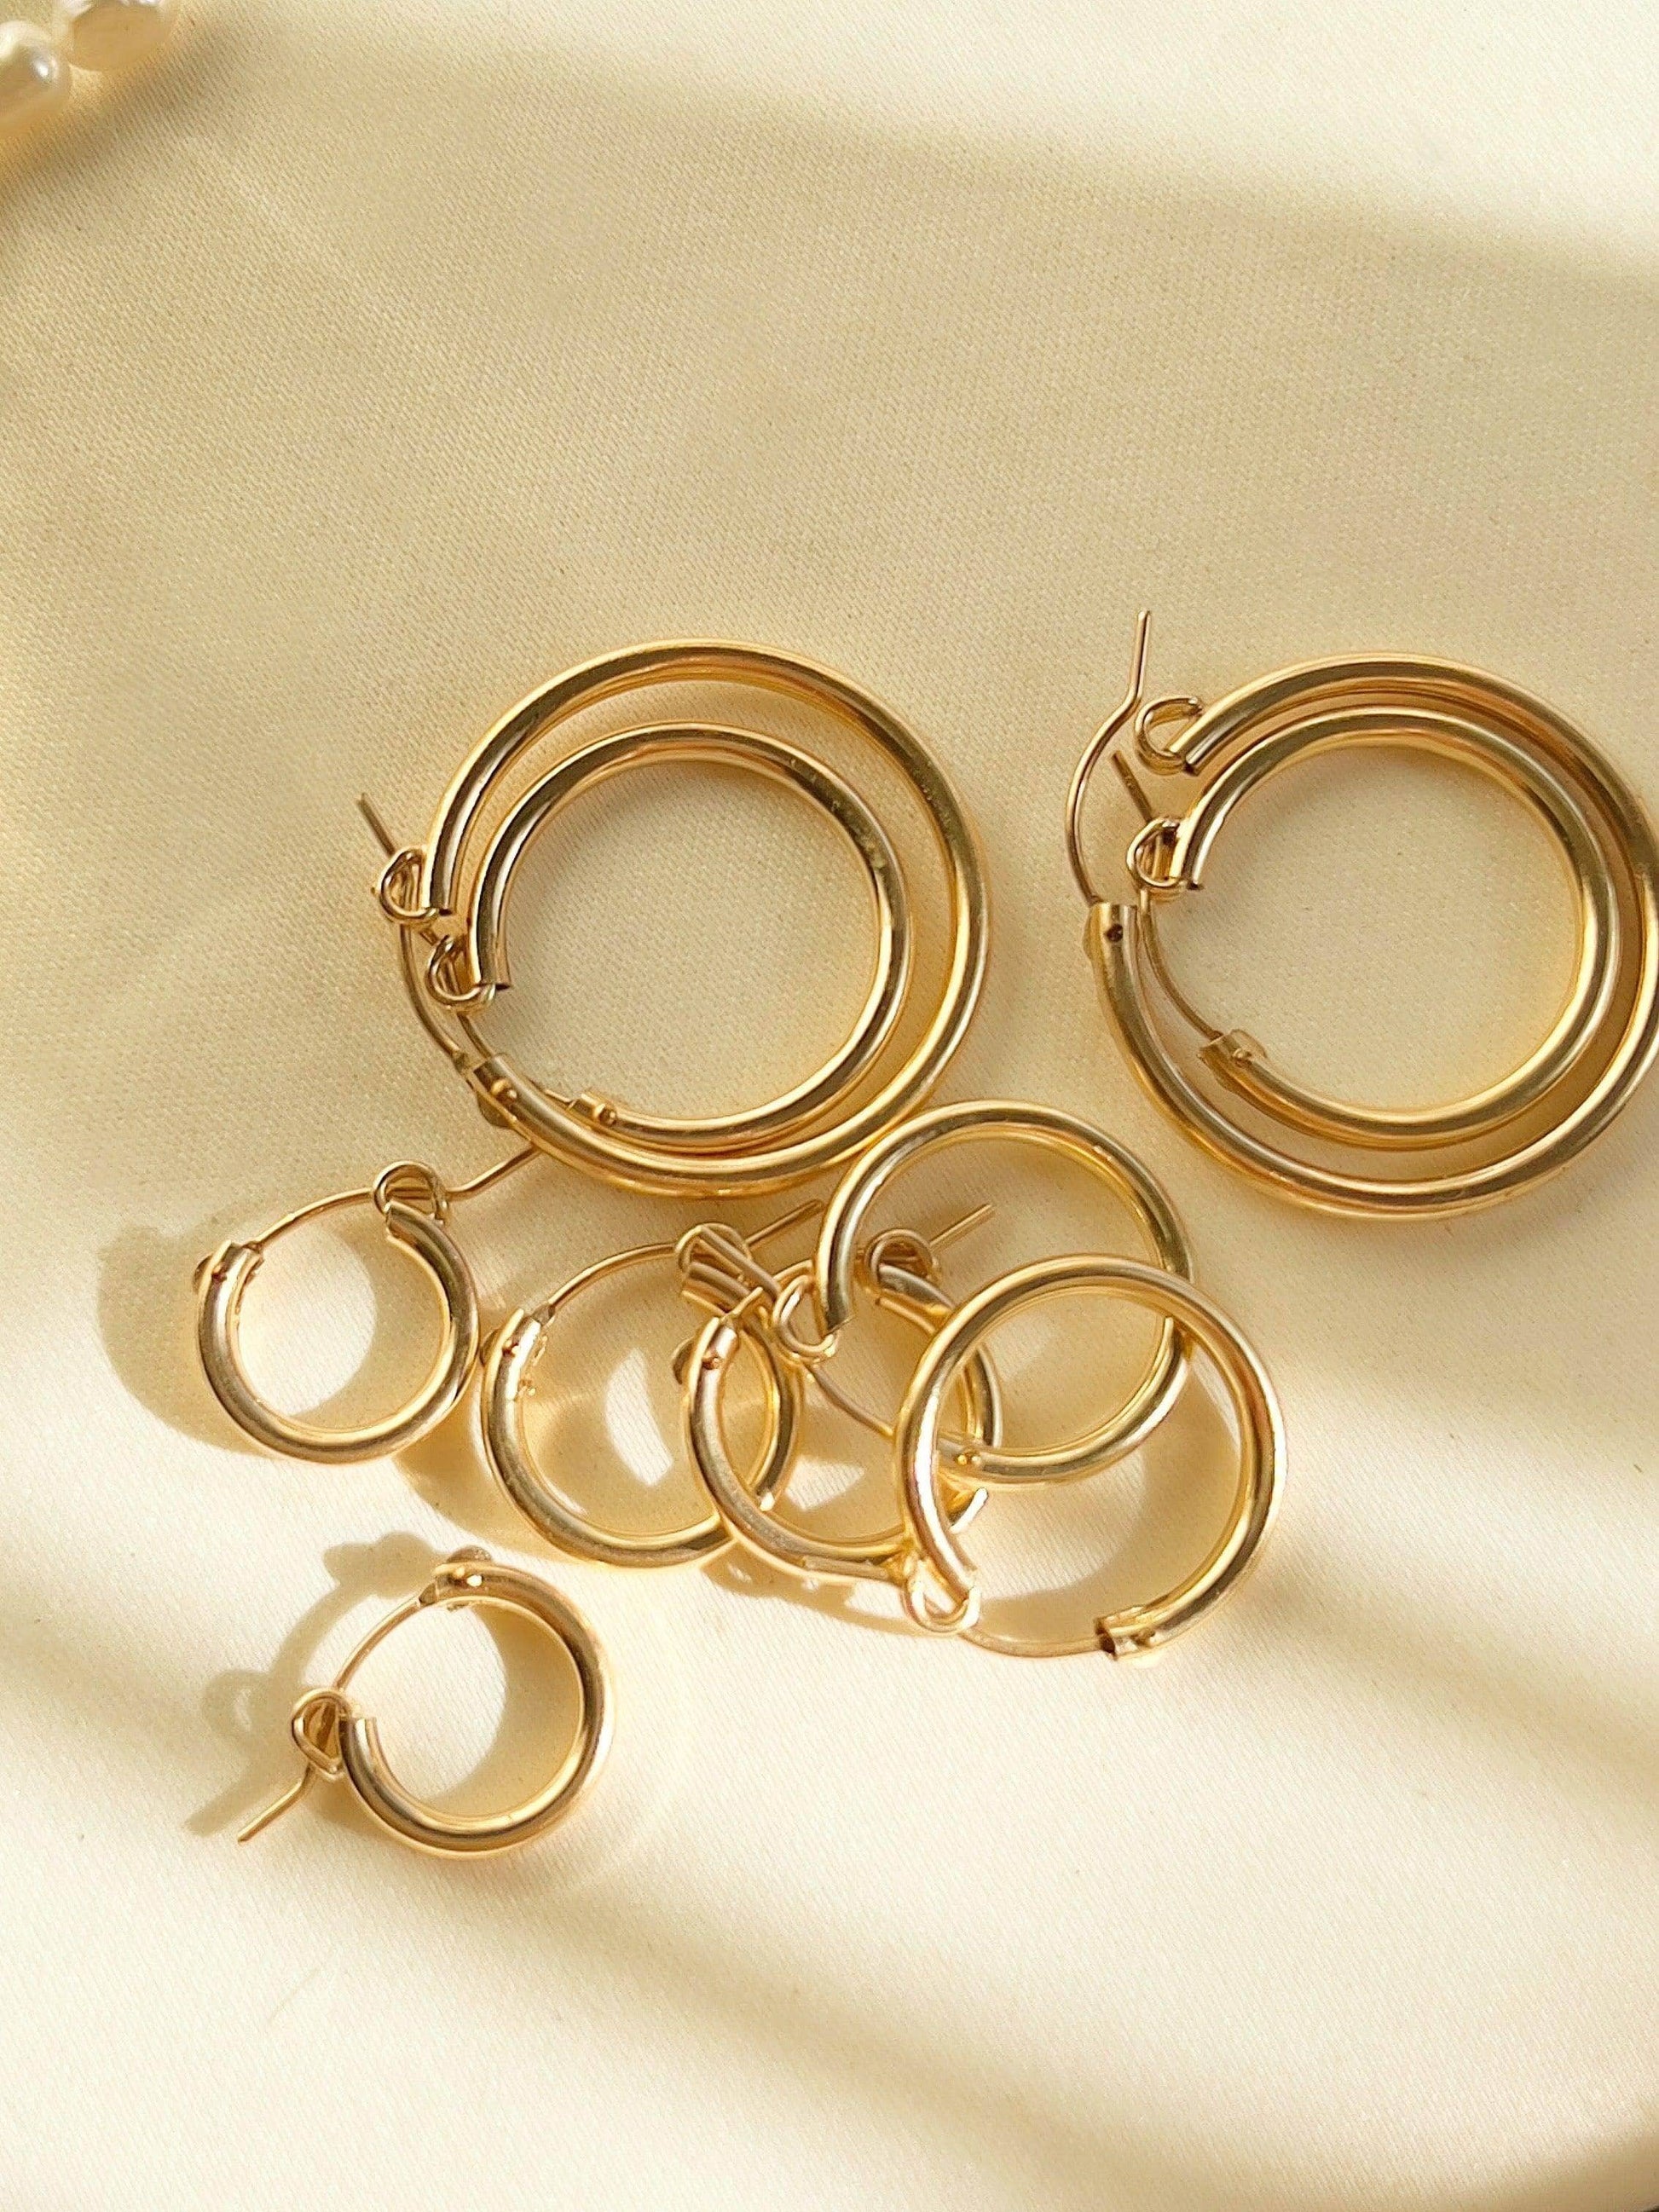 Andy 27mm Classic Hoops